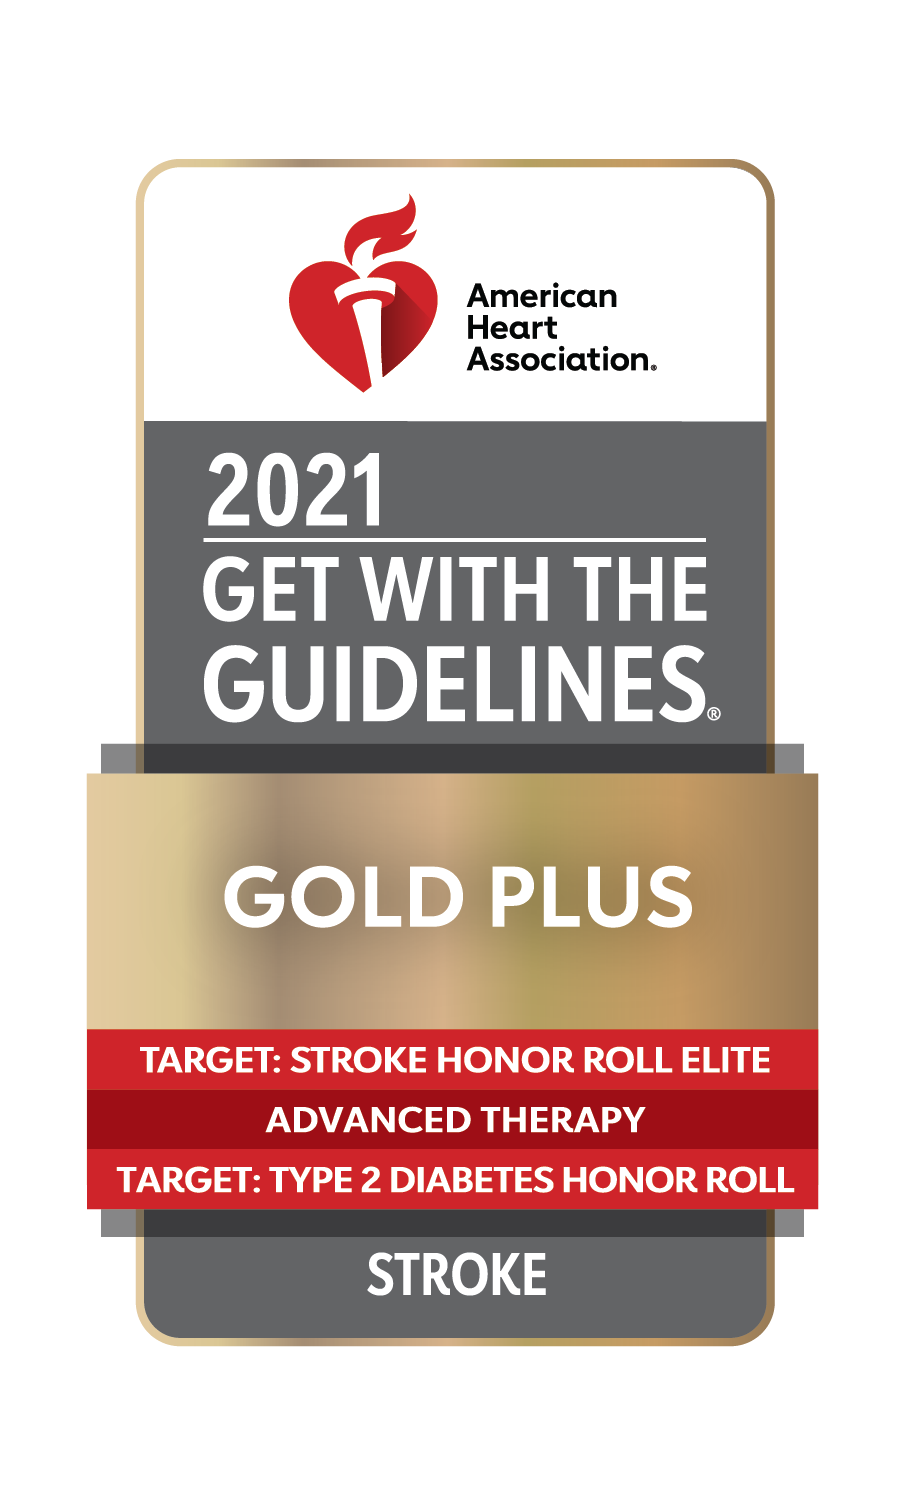 Get with the Guidelines Gold Plus Award 2021, American Heart Association